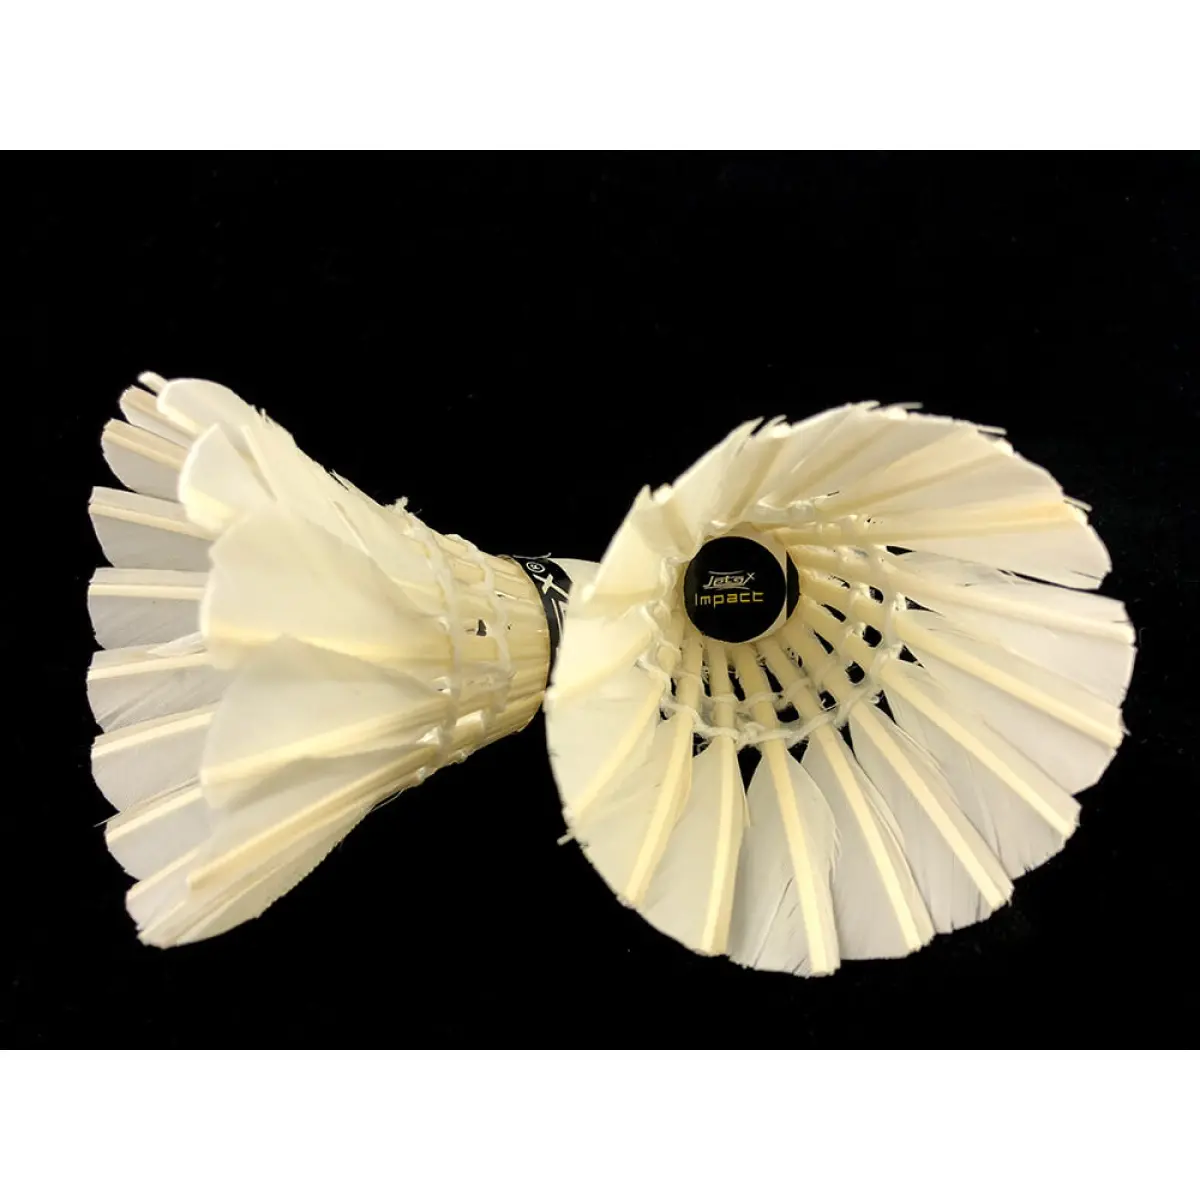 Buy Jetex Impact Hen Feather Shuttlecock at Lowest Prices